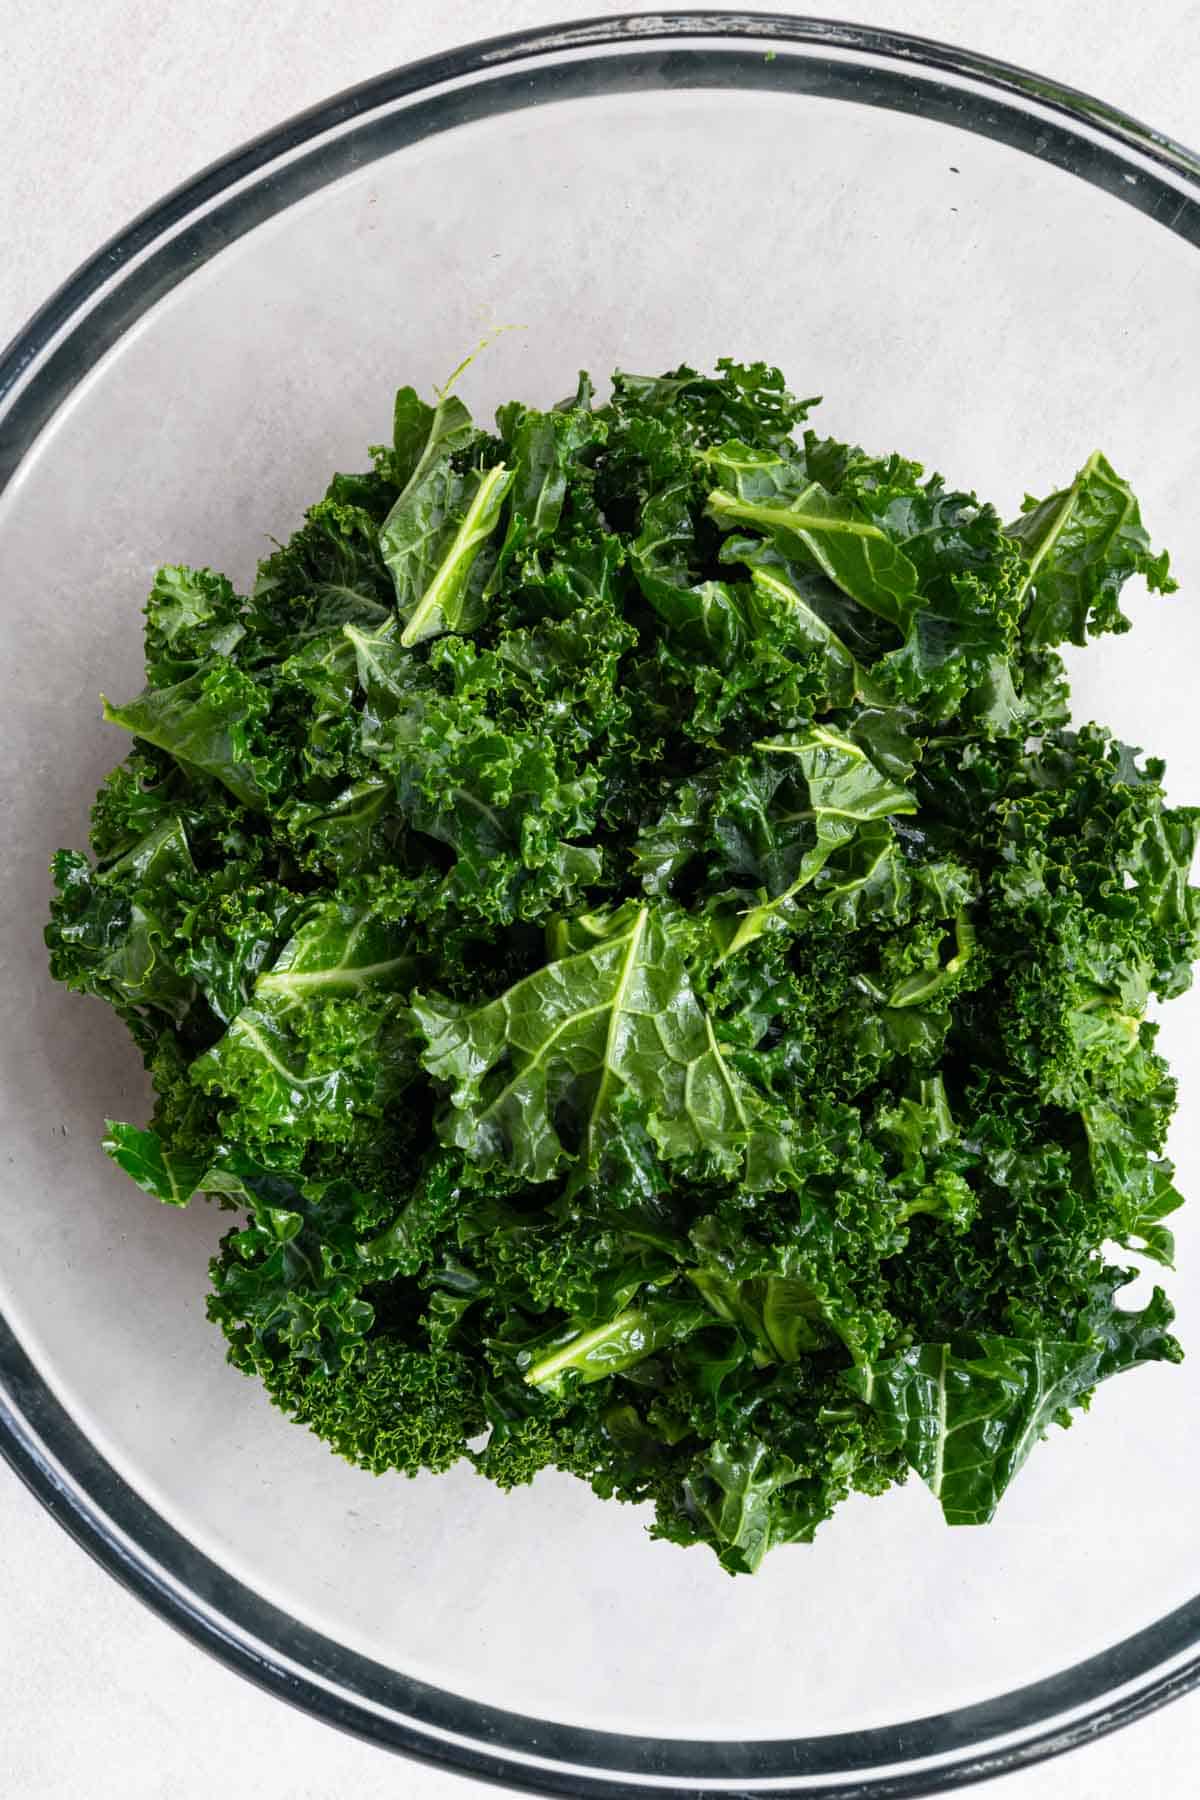 Chopped massaged kale leaves in a glass bowl.